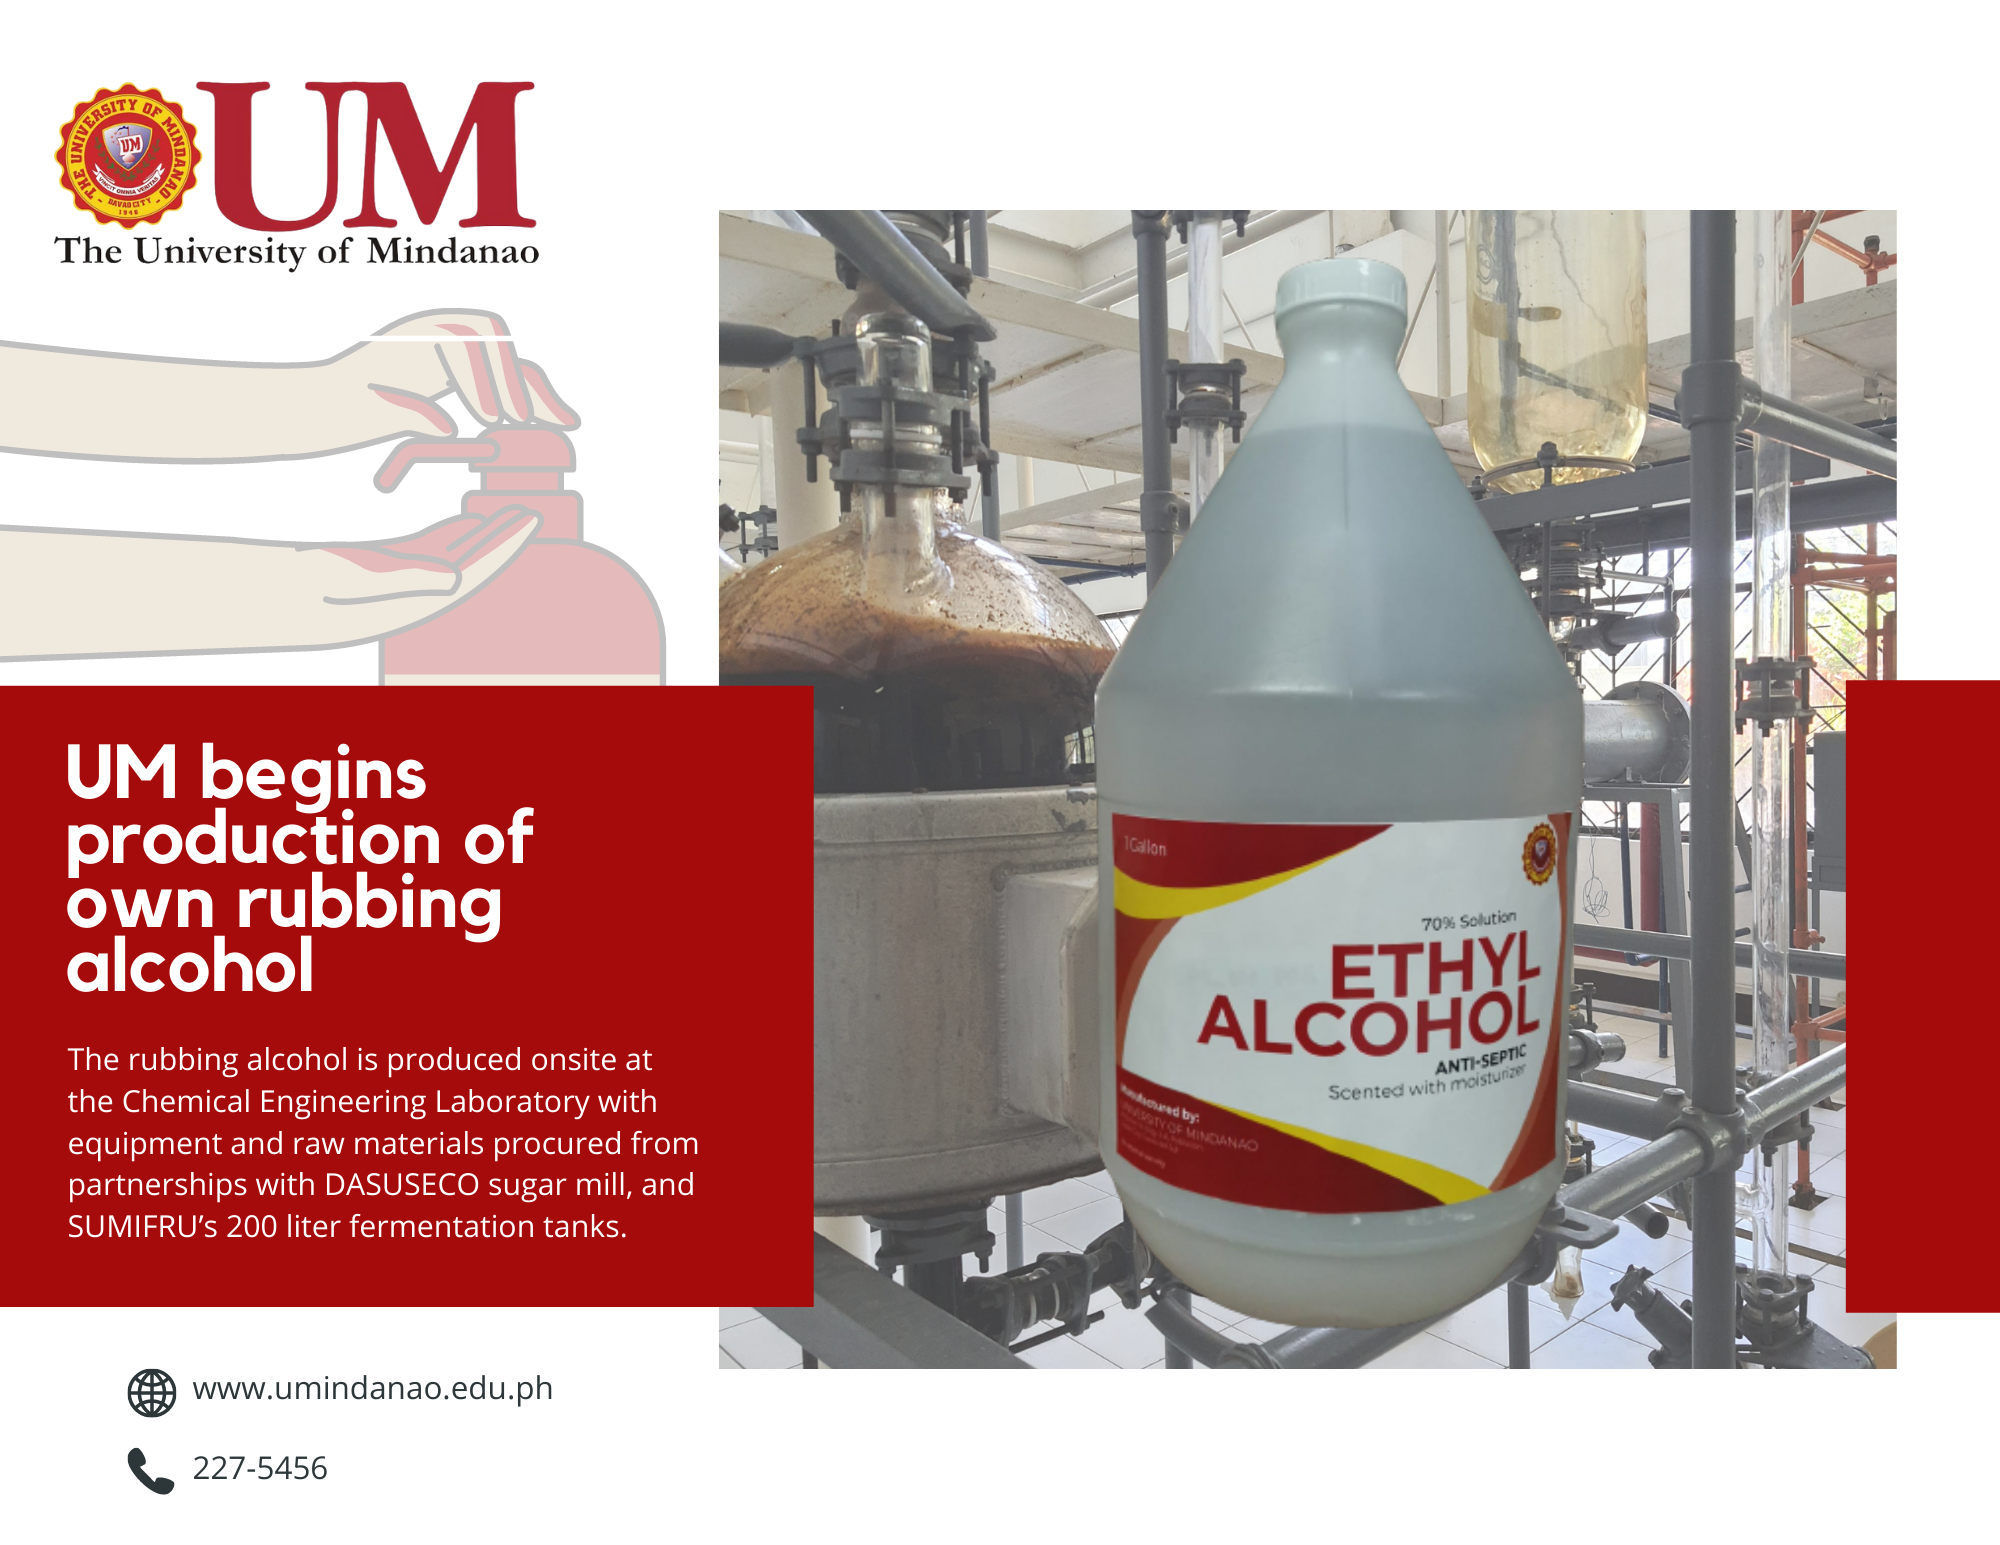 UM produces its own rubbing alcohol